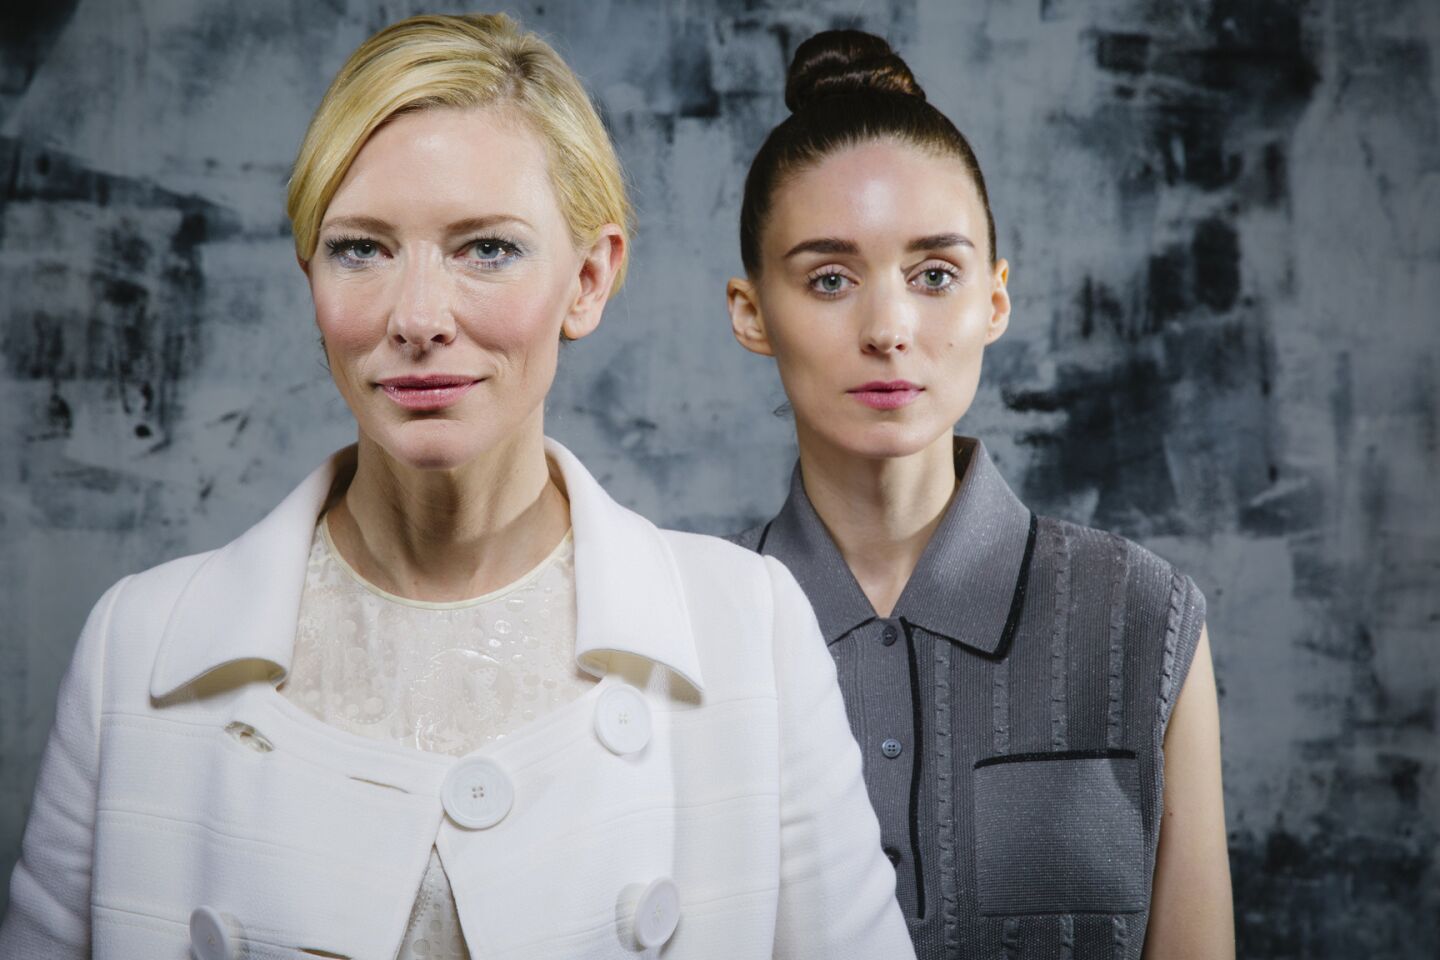 Celebrity portraits by The Times | Cate Blanchett and Rooney Mara